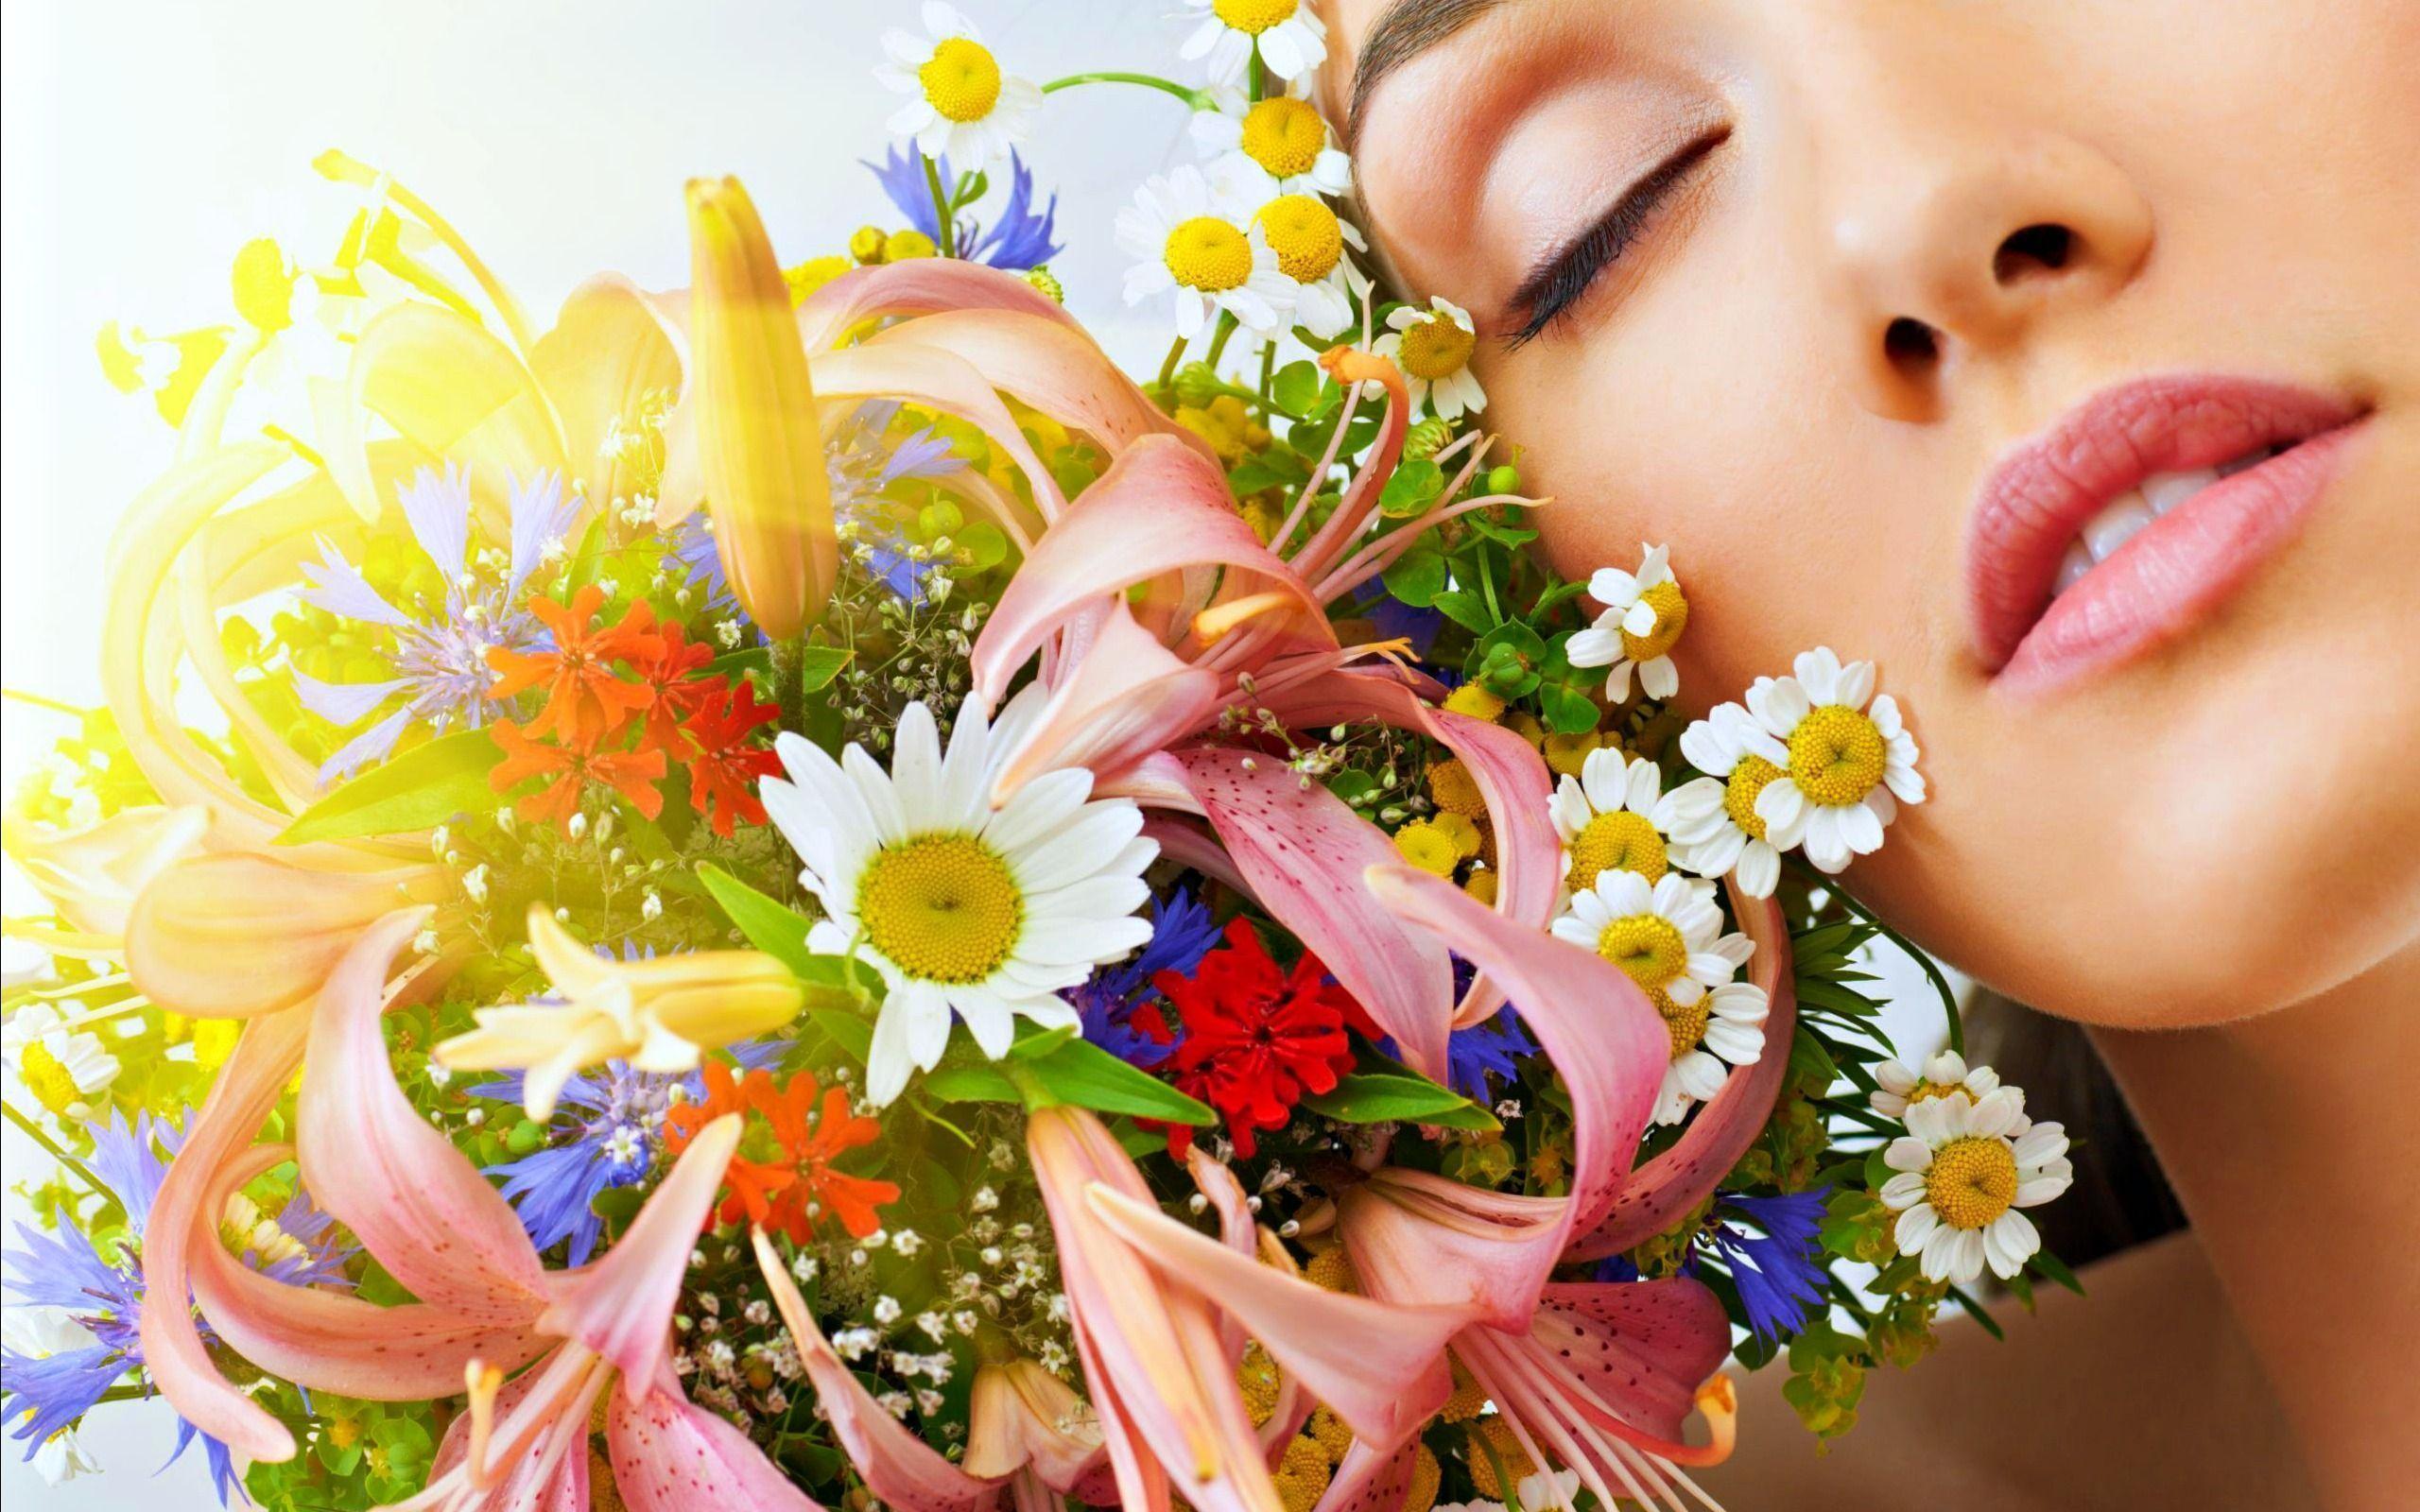 Woman Love Flower Wallpaper Picture Photo Image: Love Flowers